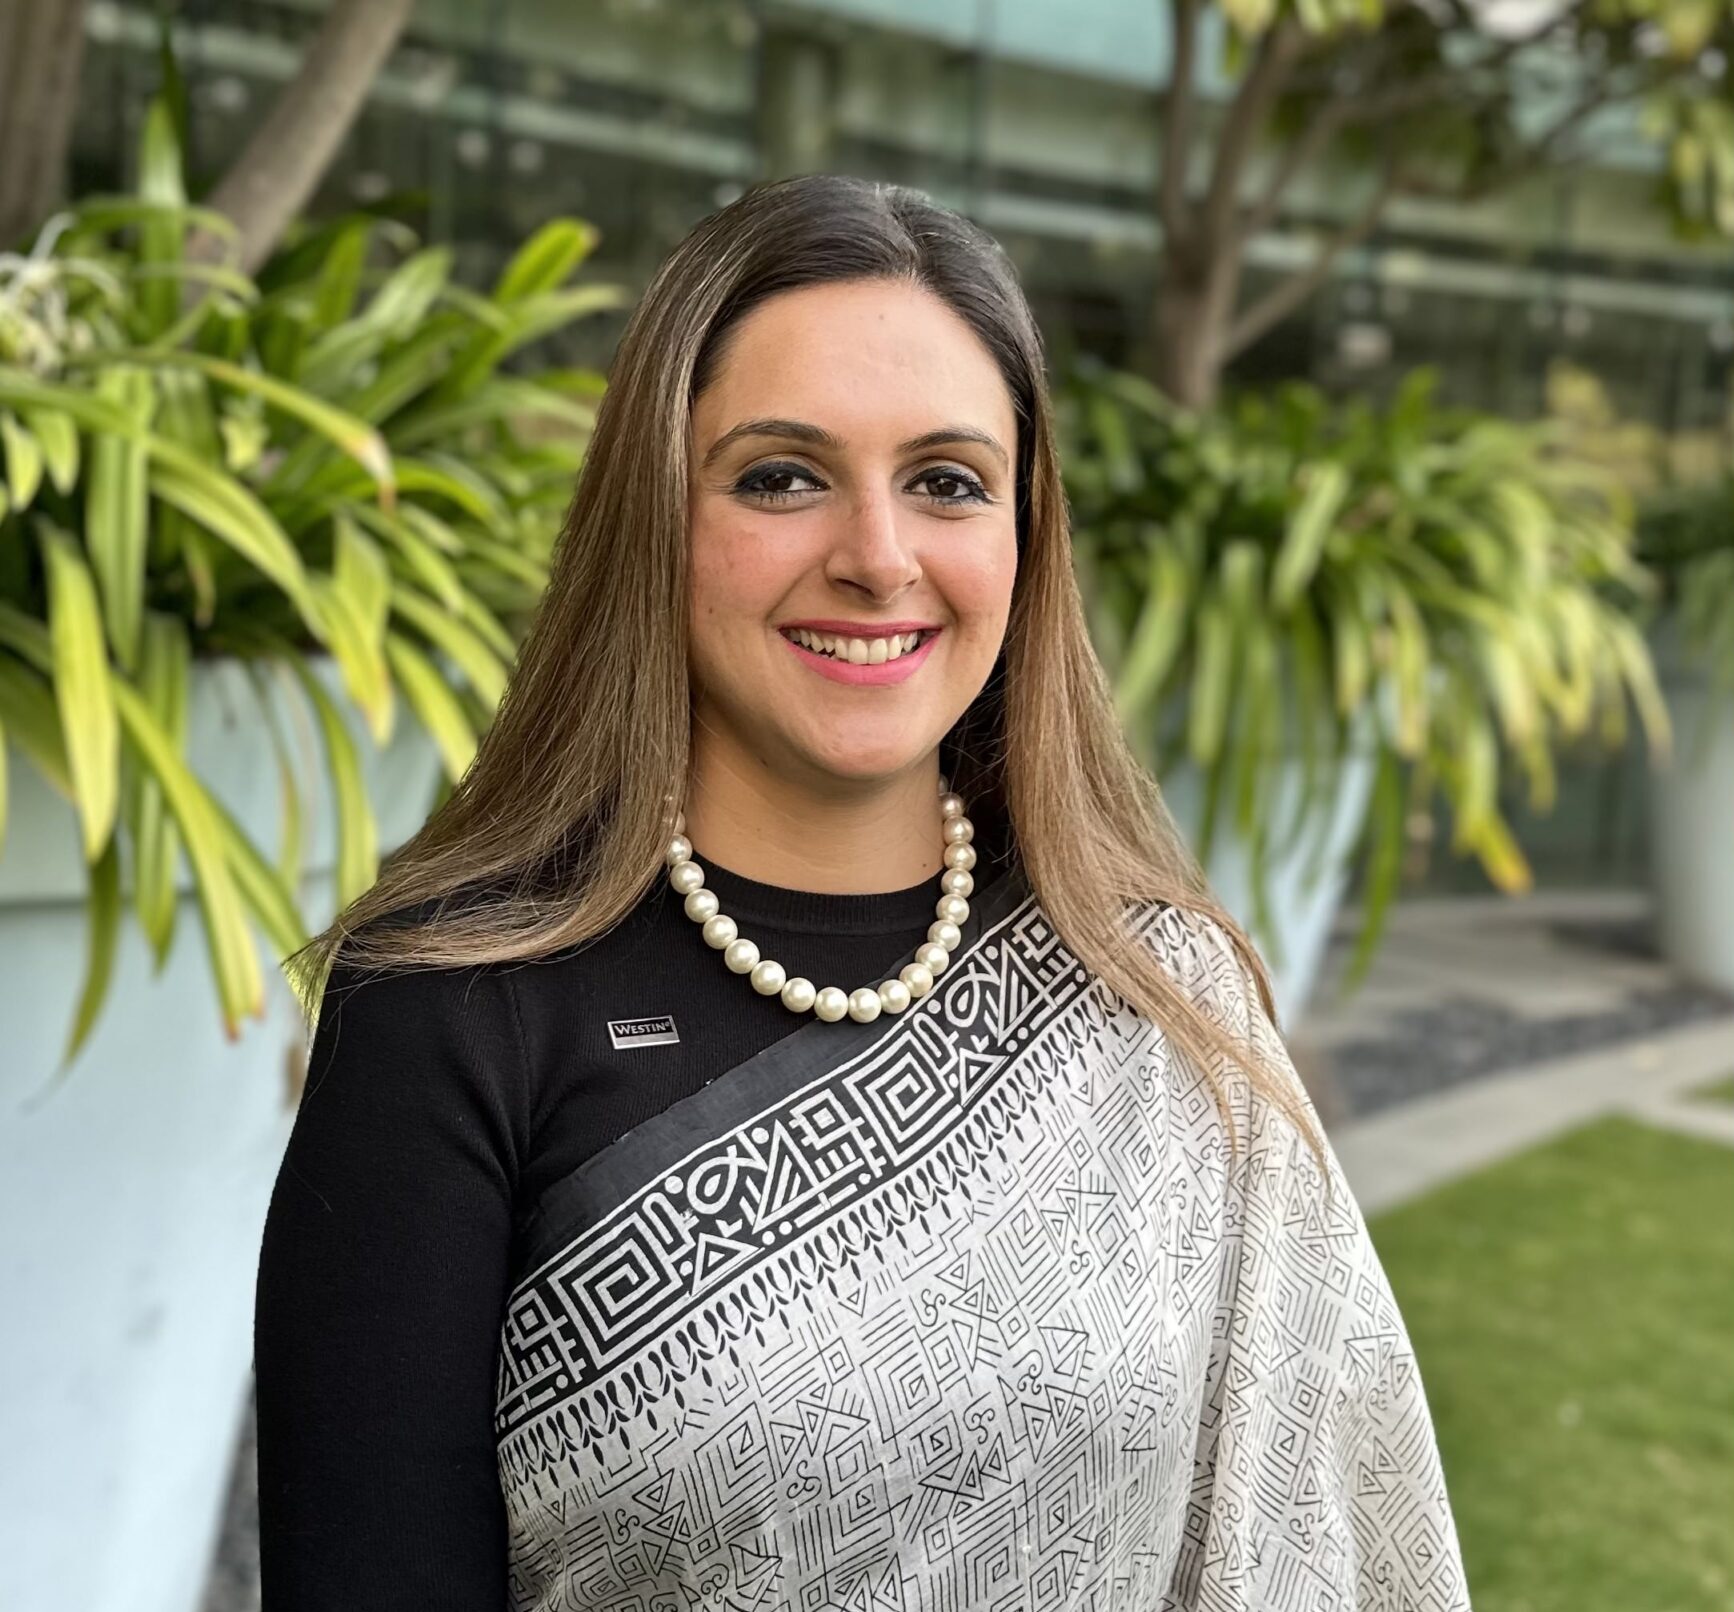 Sonam Phogat joins The Westin Sohna Resort and Spa as the new Director of Sales